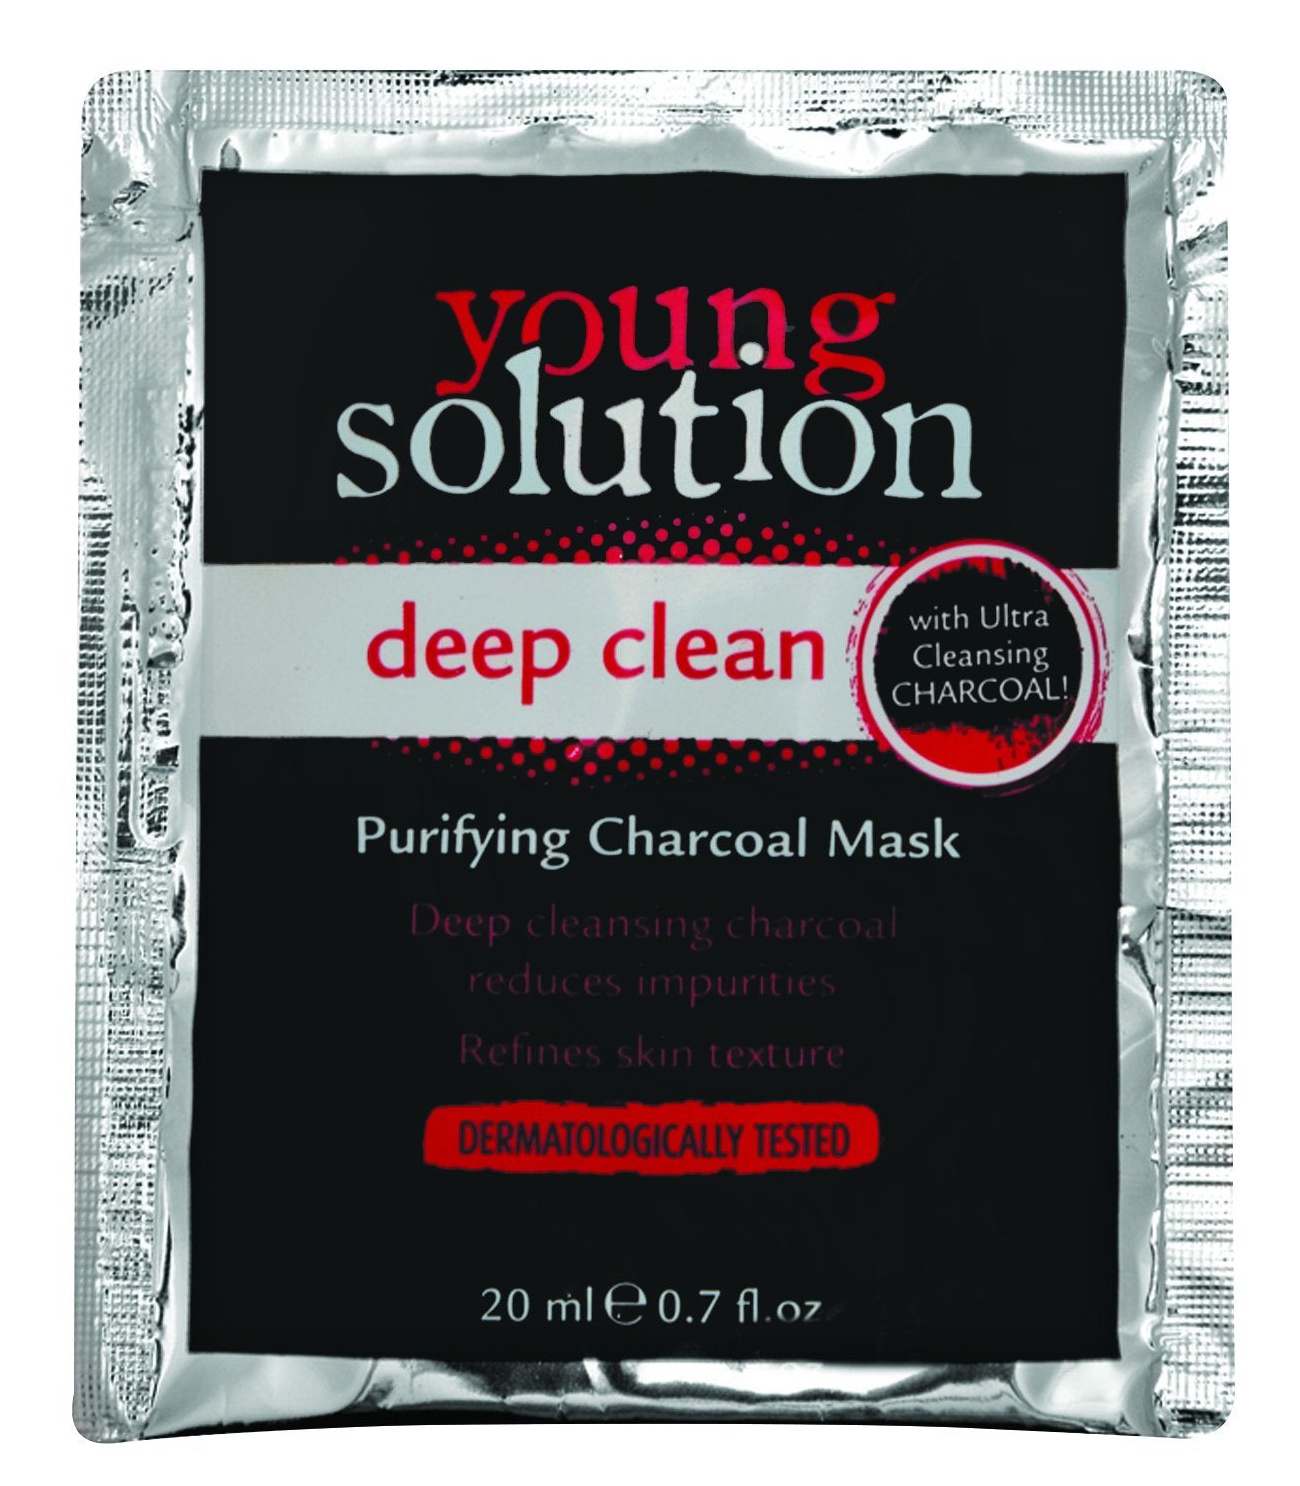 Young solution Deep Clean Purifying Charcoal Mask